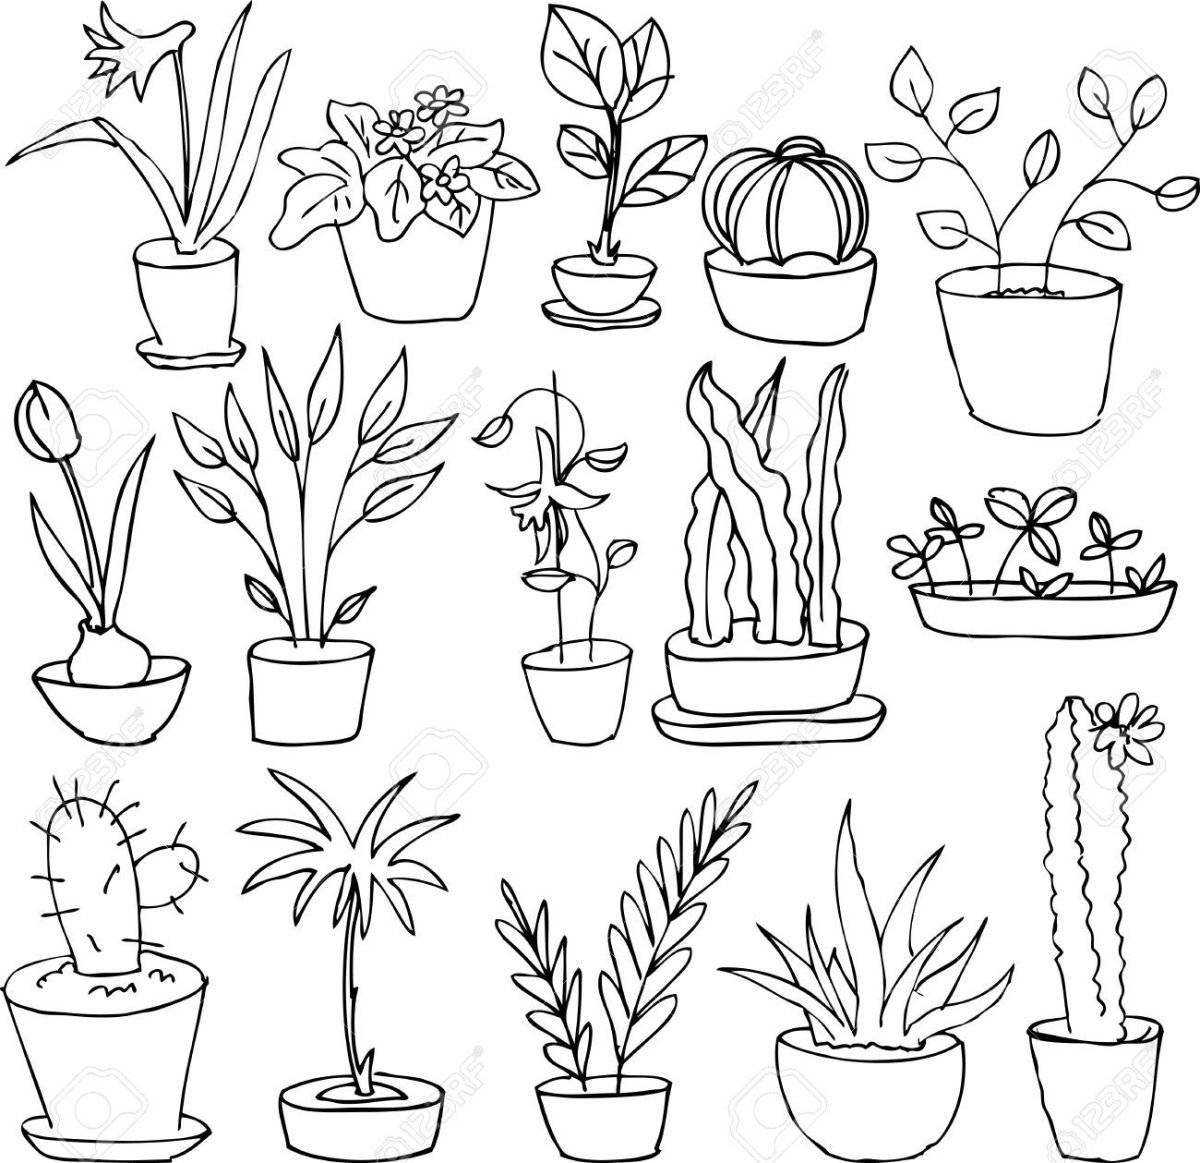 Coloring book for cute houseplants for 6-7 year olds